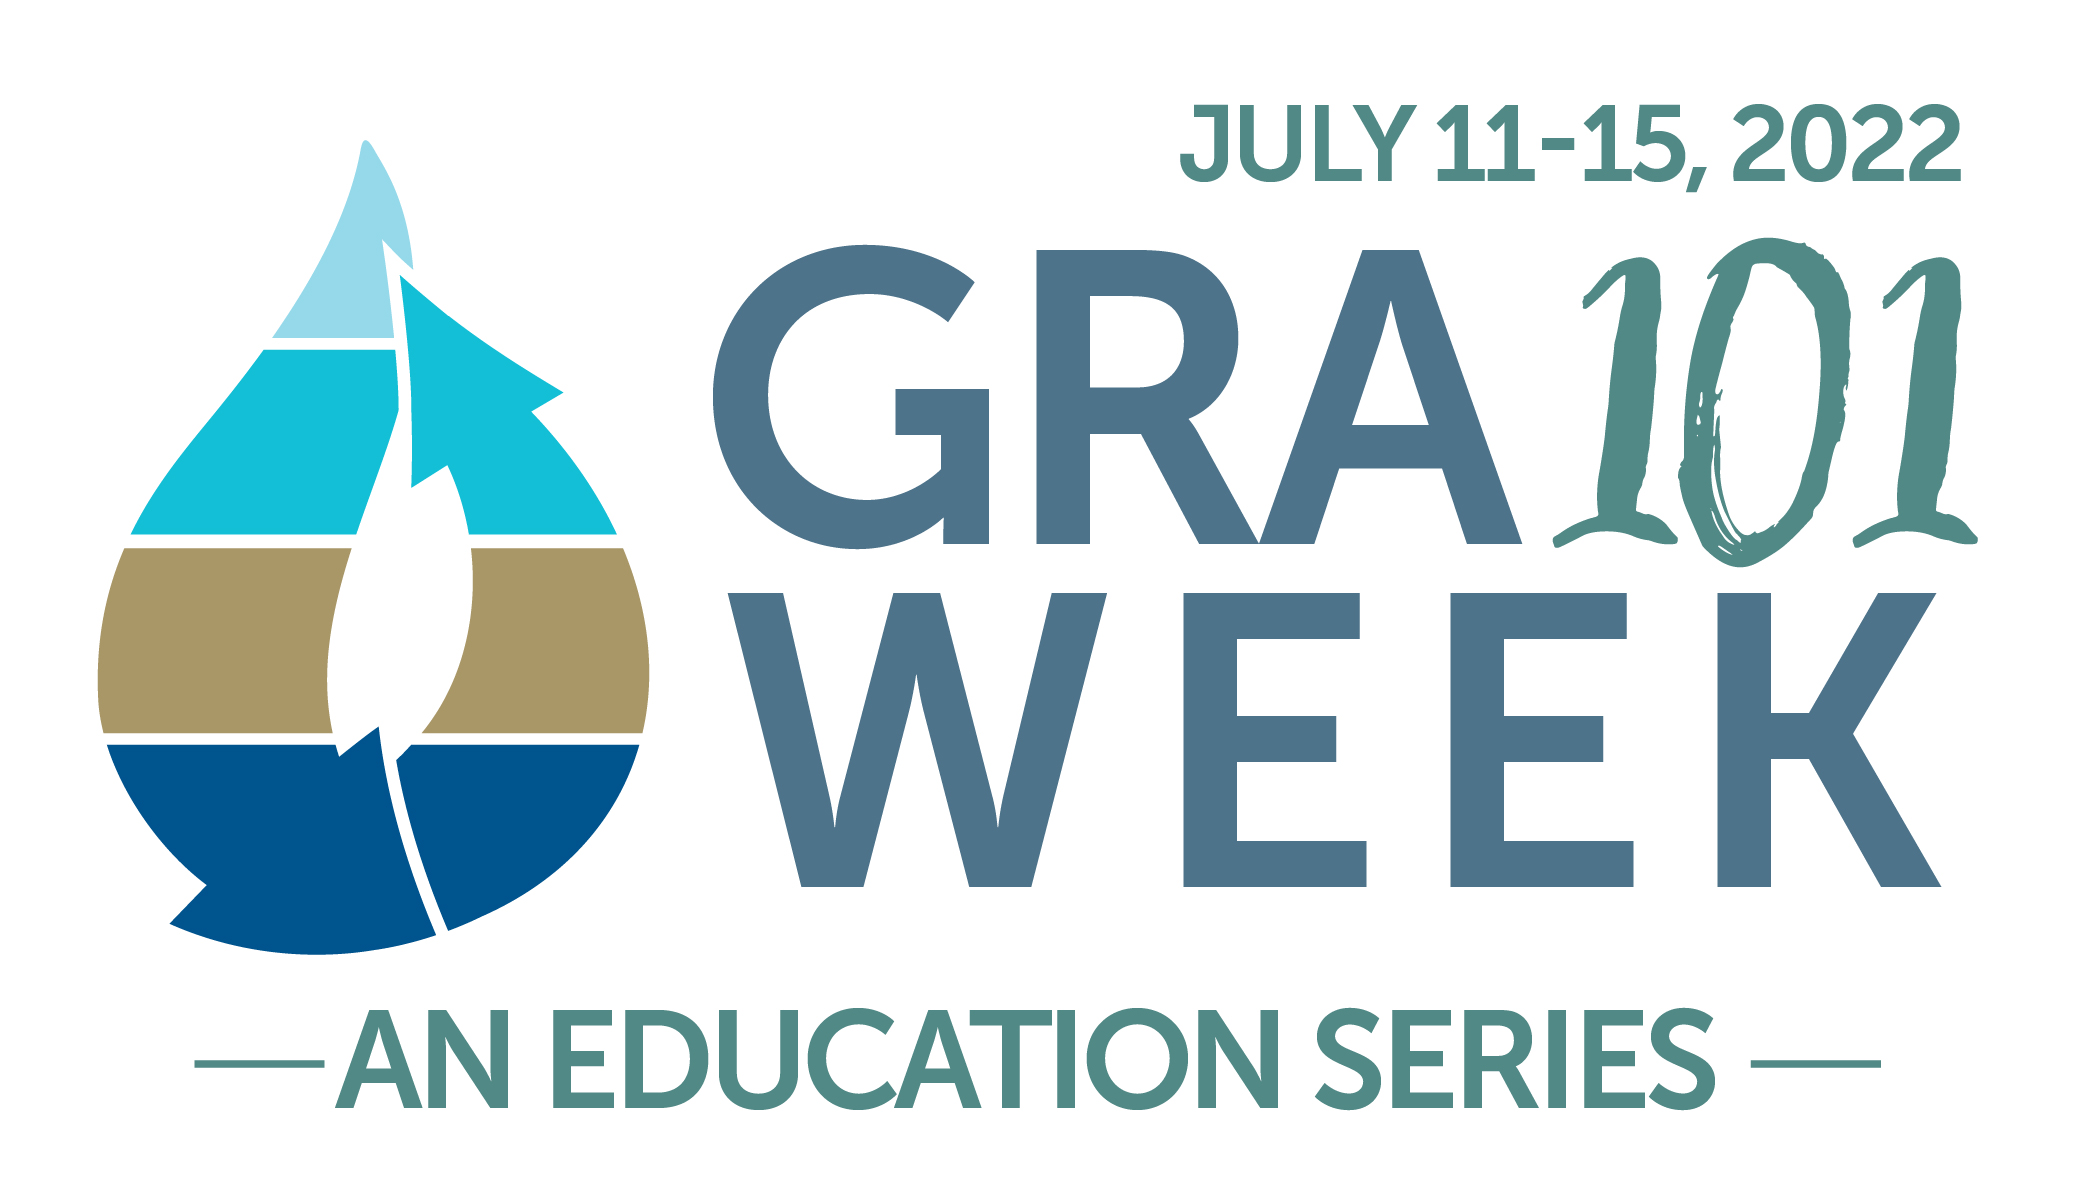 July 11 -15, 2022 – Dr. Steve Young to Teach a Course at GRA’s 101 Week